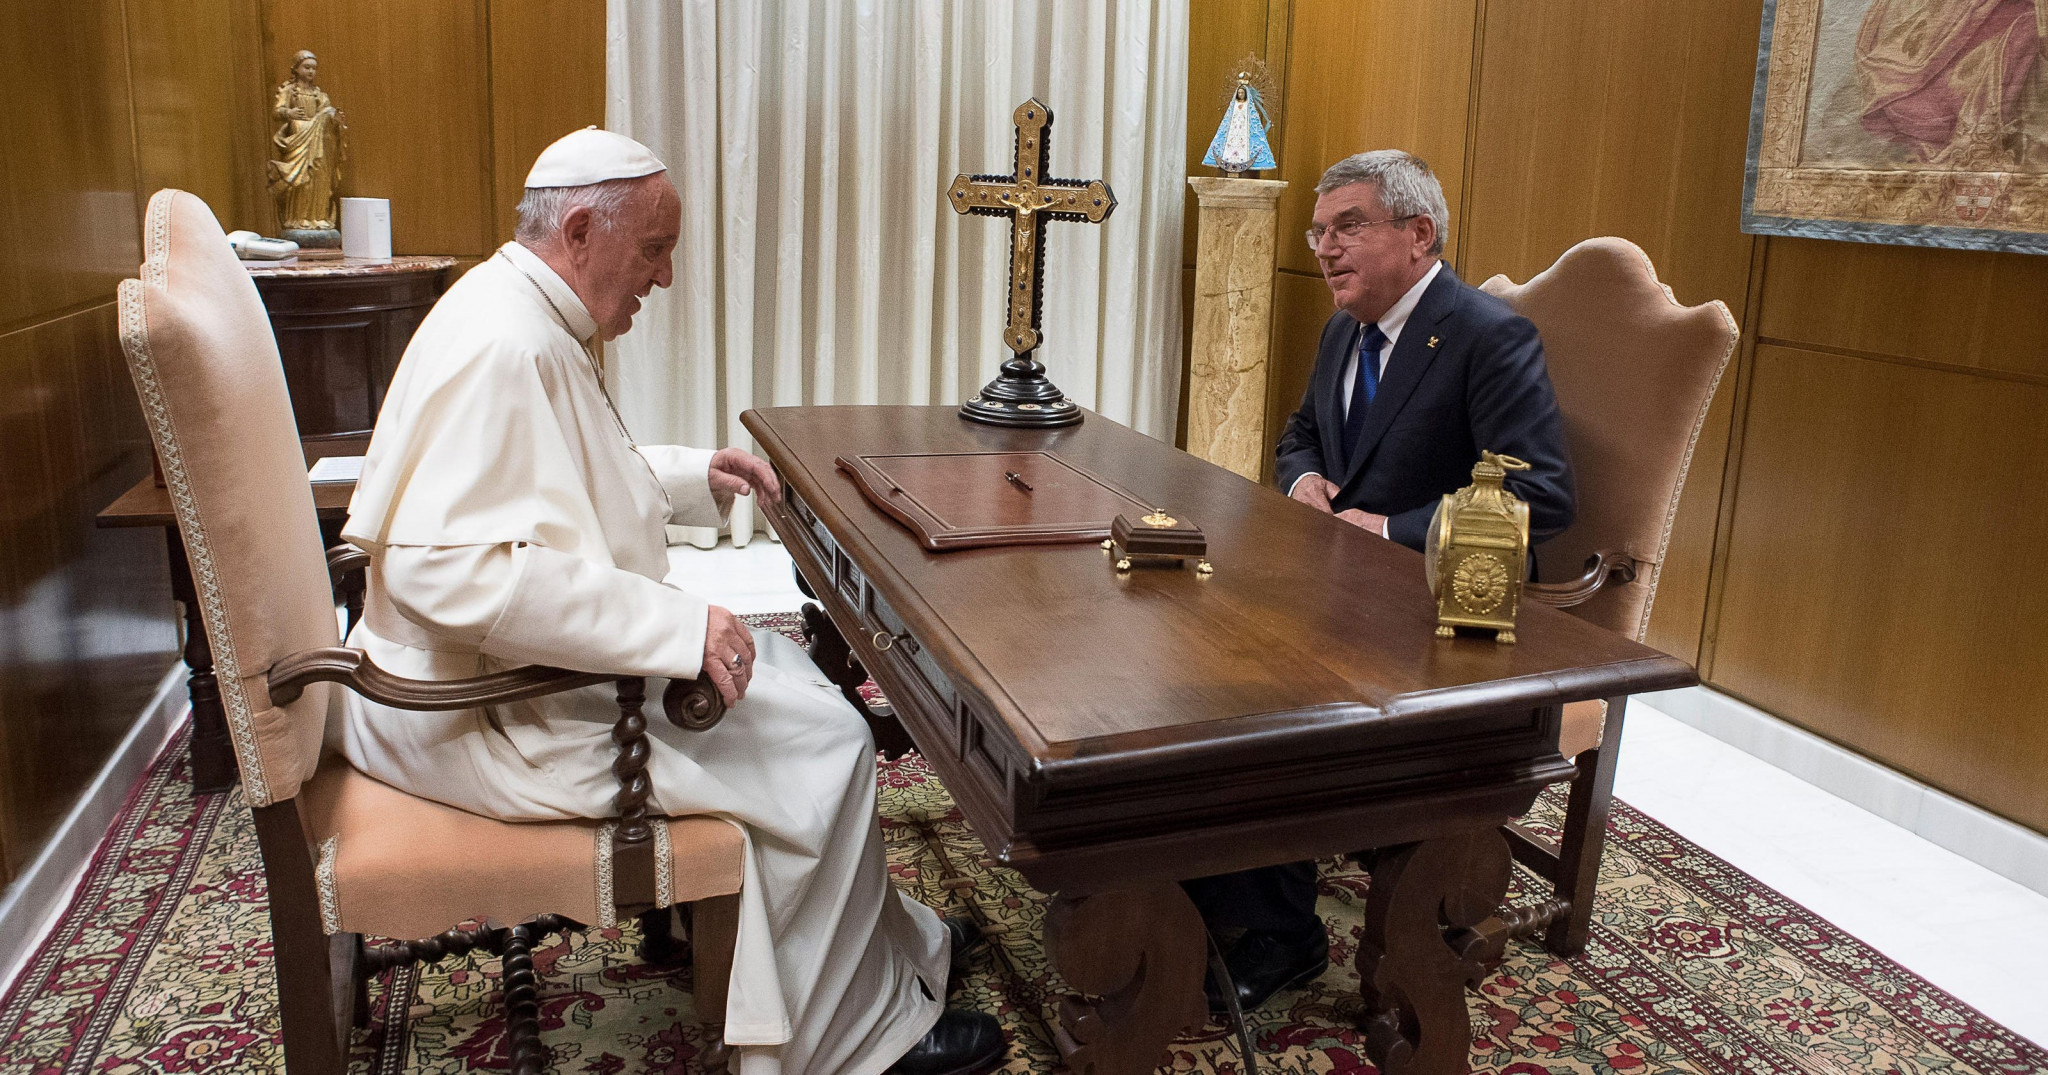 The IOC and Vatican City have close relations, with President Thomas Bach having met the Pope on several occasions - now they want to take part in the Olympic Games Opening Ceremony ©IOC